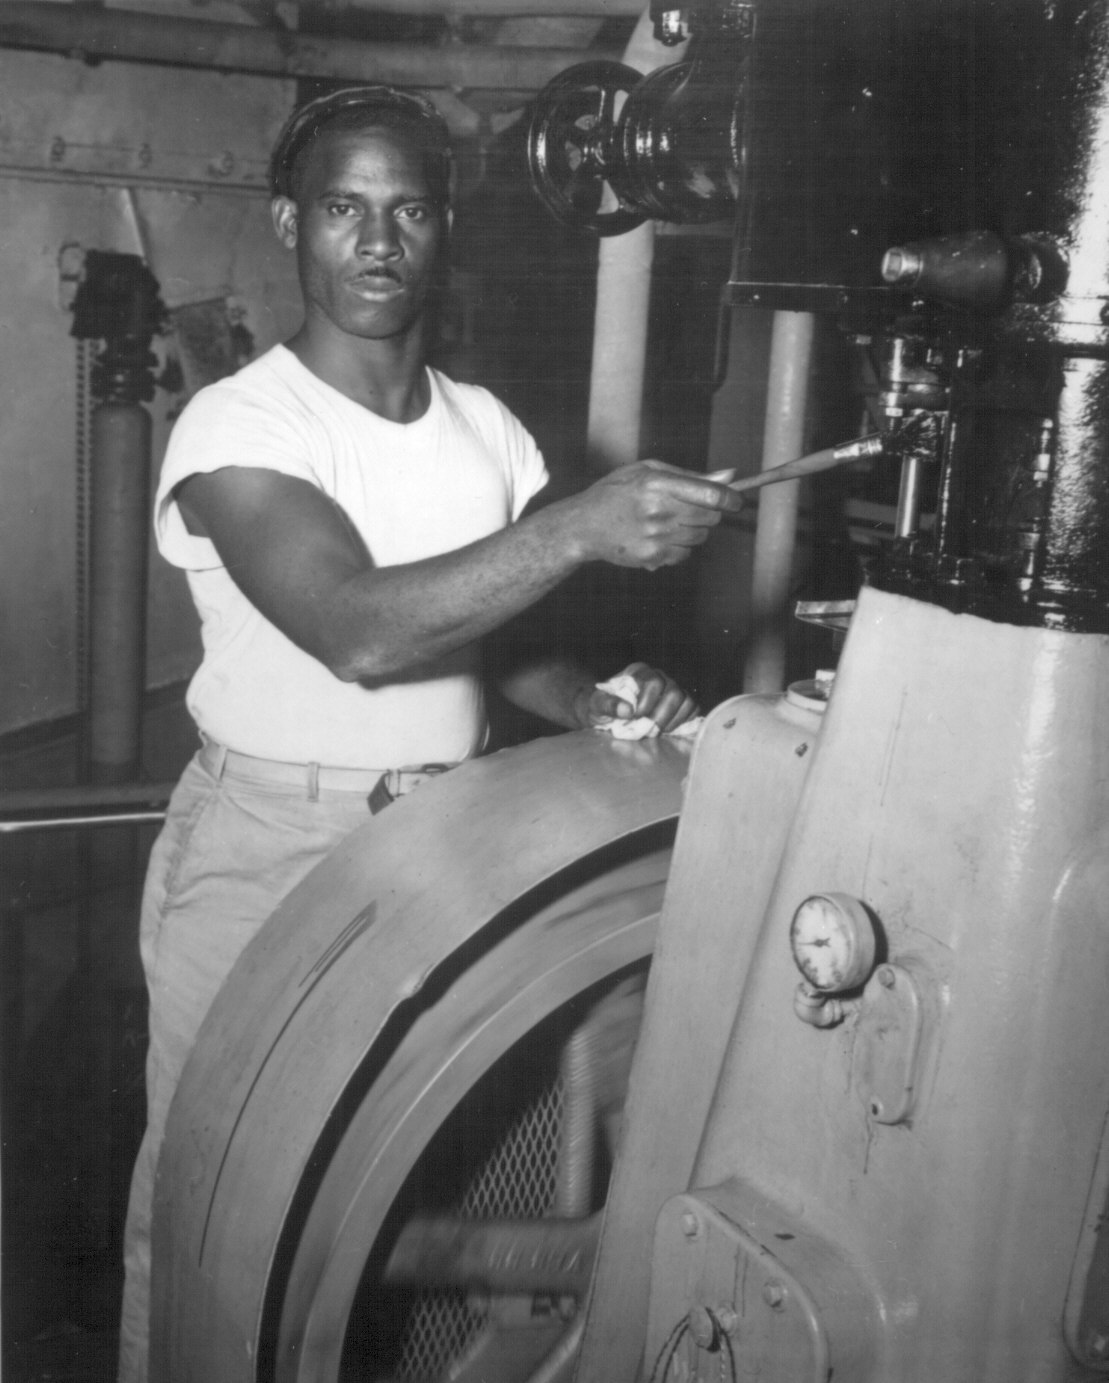 African-American US Merchant Marine oiler Arnold R. Fesser: 'We got a big job to do until this war is won. We will keep them sailing until the end. Then we have got time for holidays.' 14 Oct 1944